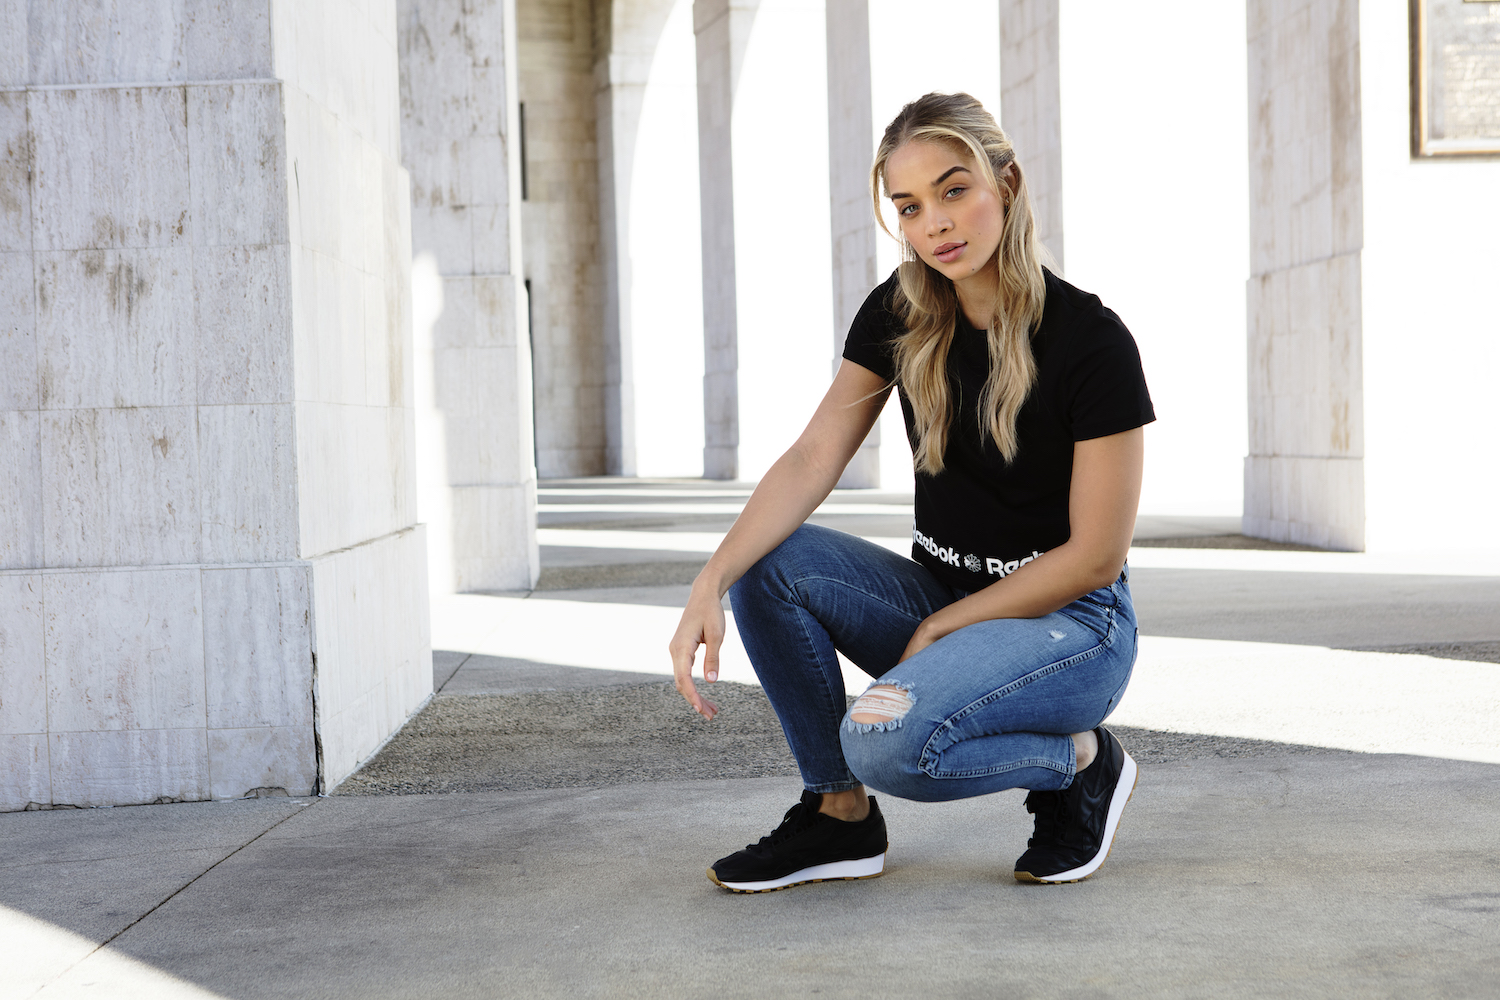 Recogiendo hojas carga Odiseo Jasmine Sanders Partners with Reebok and Lady Foot Locker for Fashion  Campaign and Collection - WearTesters